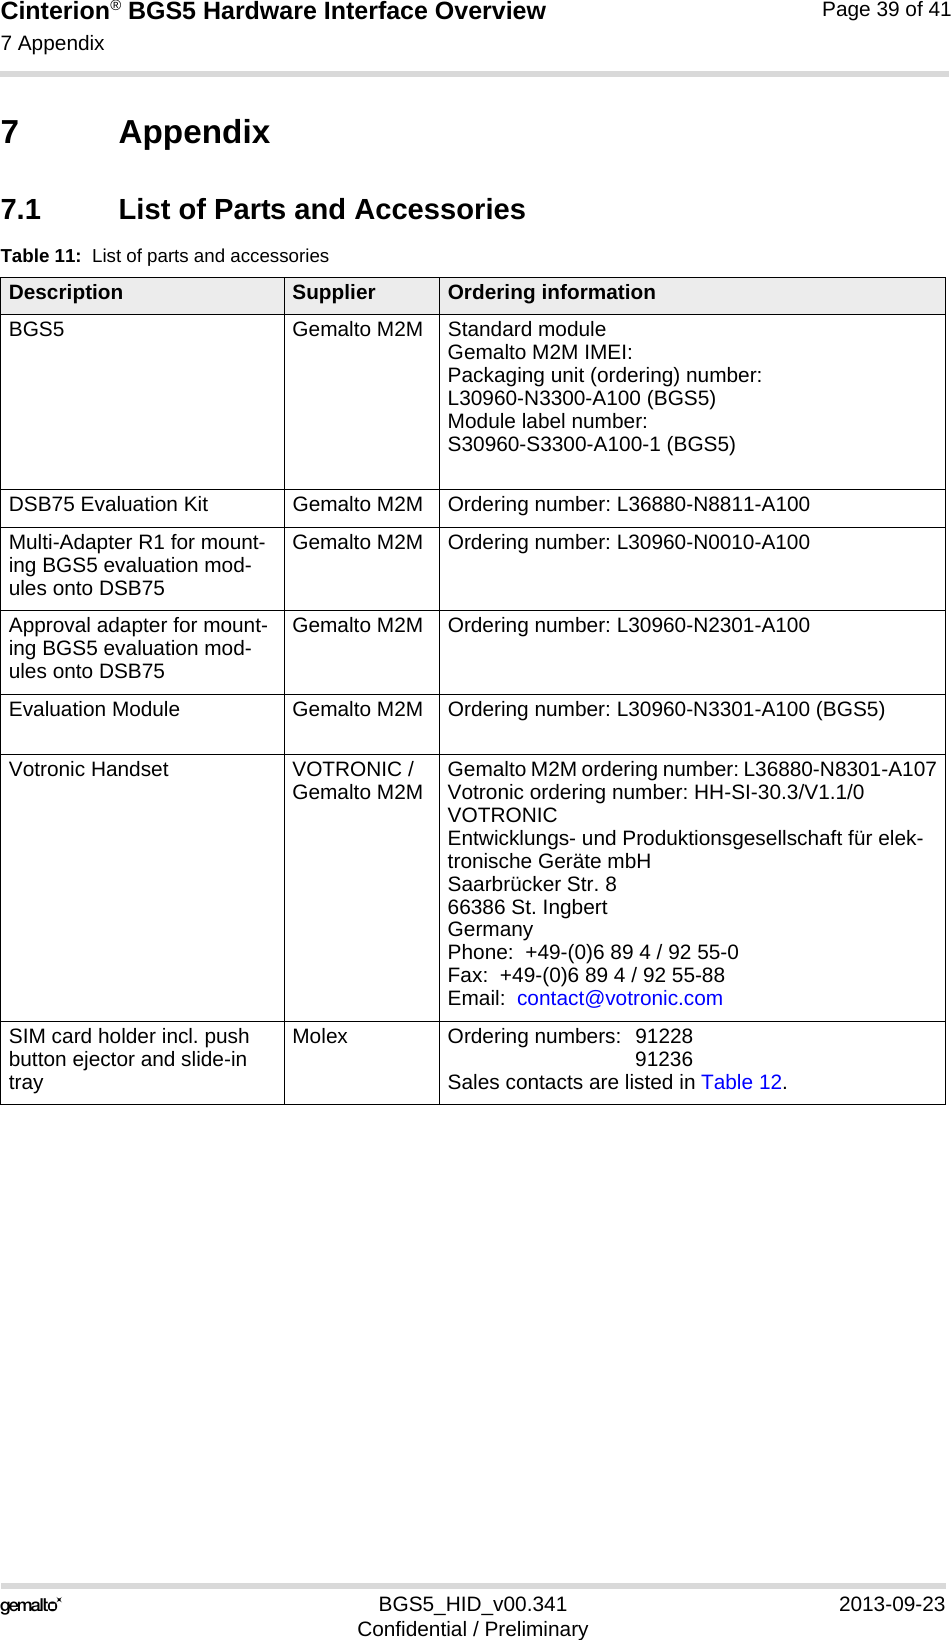 Cinterion® BGS5 Hardware Interface Overview7 Appendix40BGS5_HID_v00.341 2013-09-23Confidential / PreliminaryPage 39 of 417 Appendix7.1 List of Parts and AccessoriesTable 11:  List of parts and accessoriesDescription Supplier Ordering informationBGS5 Gemalto M2M Standard module Gemalto M2M IMEI:Packaging unit (ordering) number:L30960-N3300-A100 (BGS5)Module label number:S30960-S3300-A100-1 (BGS5)DSB75 Evaluation Kit Gemalto M2M Ordering number: L36880-N8811-A100Multi-Adapter R1 for mount-ing BGS5 evaluation mod-ules onto DSB75Gemalto M2M Ordering number: L30960-N0010-A100Approval adapter for mount-ing BGS5 evaluation mod-ules onto DSB75Gemalto M2M Ordering number: L30960-N2301-A100Evaluation Module Gemalto M2M Ordering number: L30960-N3301-A100 (BGS5)Votronic Handset VOTRONIC / Gemalto M2M Gemalto M2M ordering number: L36880-N8301-A107Votronic ordering number: HH-SI-30.3/V1.1/0VOTRONIC Entwicklungs- und Produktionsgesellschaft für elek-tronische Geräte mbHSaarbrücker Str. 866386 St. IngbertGermanyPhone:  +49-(0)6 89 4 / 92 55-0Fax:  +49-(0)6 89 4 / 92 55-88Email:  contact@votronic.comSIM card holder incl. push button ejector and slide-in trayMolex Ordering numbers:  91228 91236Sales contacts are listed in Table 12.